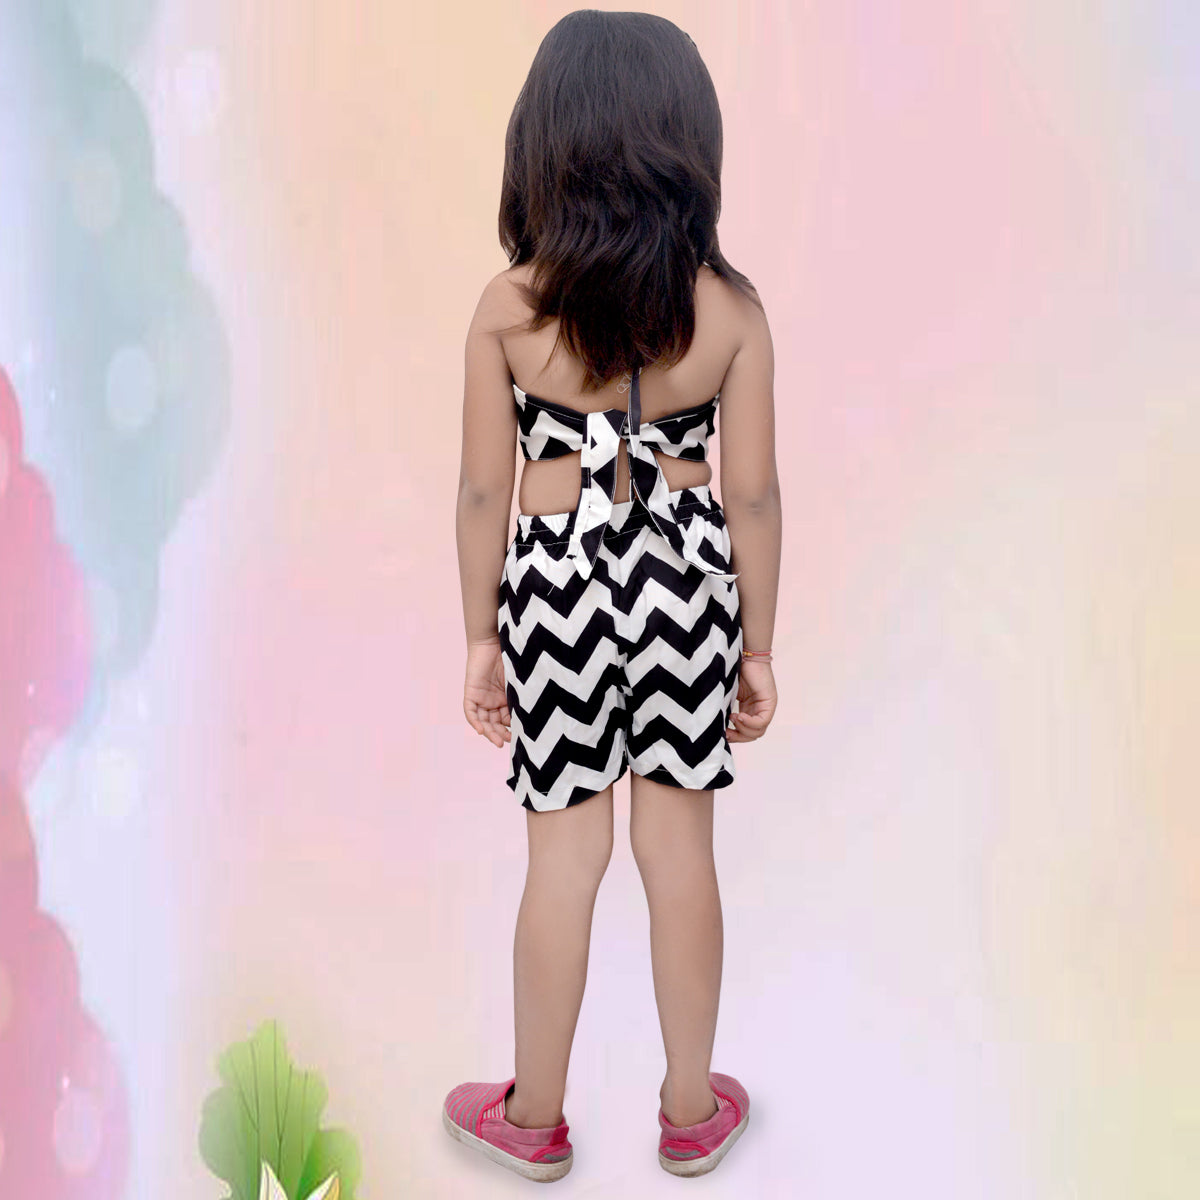 Stylish Designer Flamingo Print & Black White Lining Top And Shorts ( Combo Pack Of 2 ) for Kids.